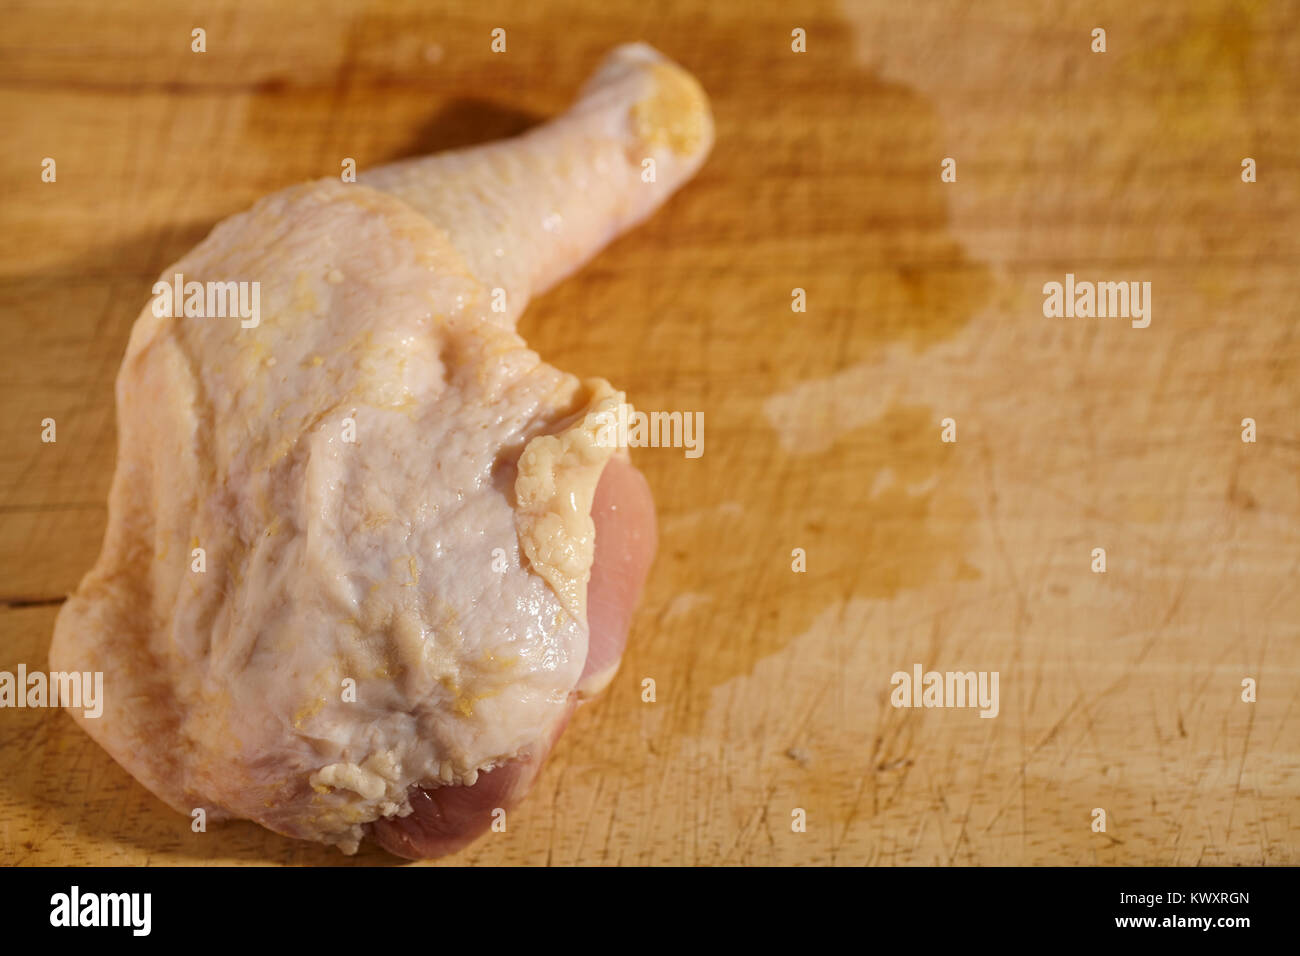 raw chicken leg and thigh on a wood butcher block Stock Photo